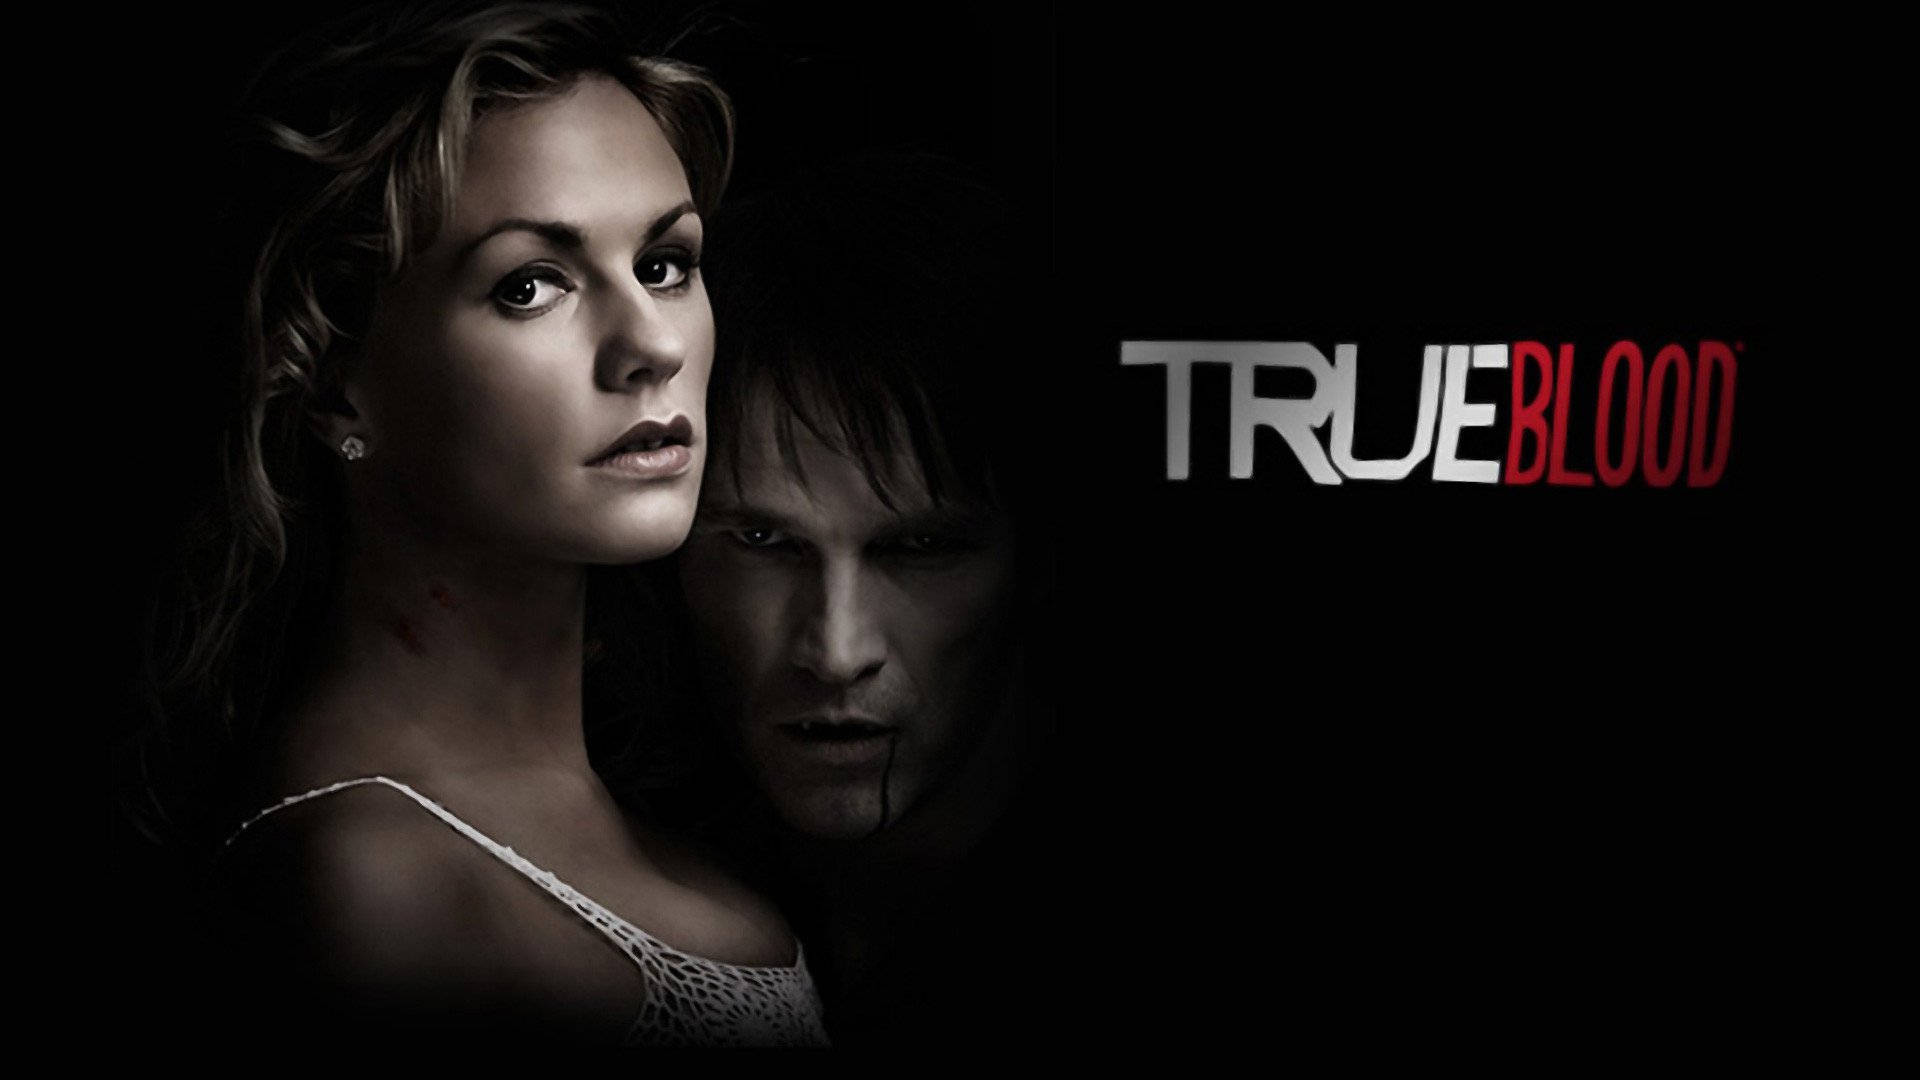 True Blood Official Promo Art Background